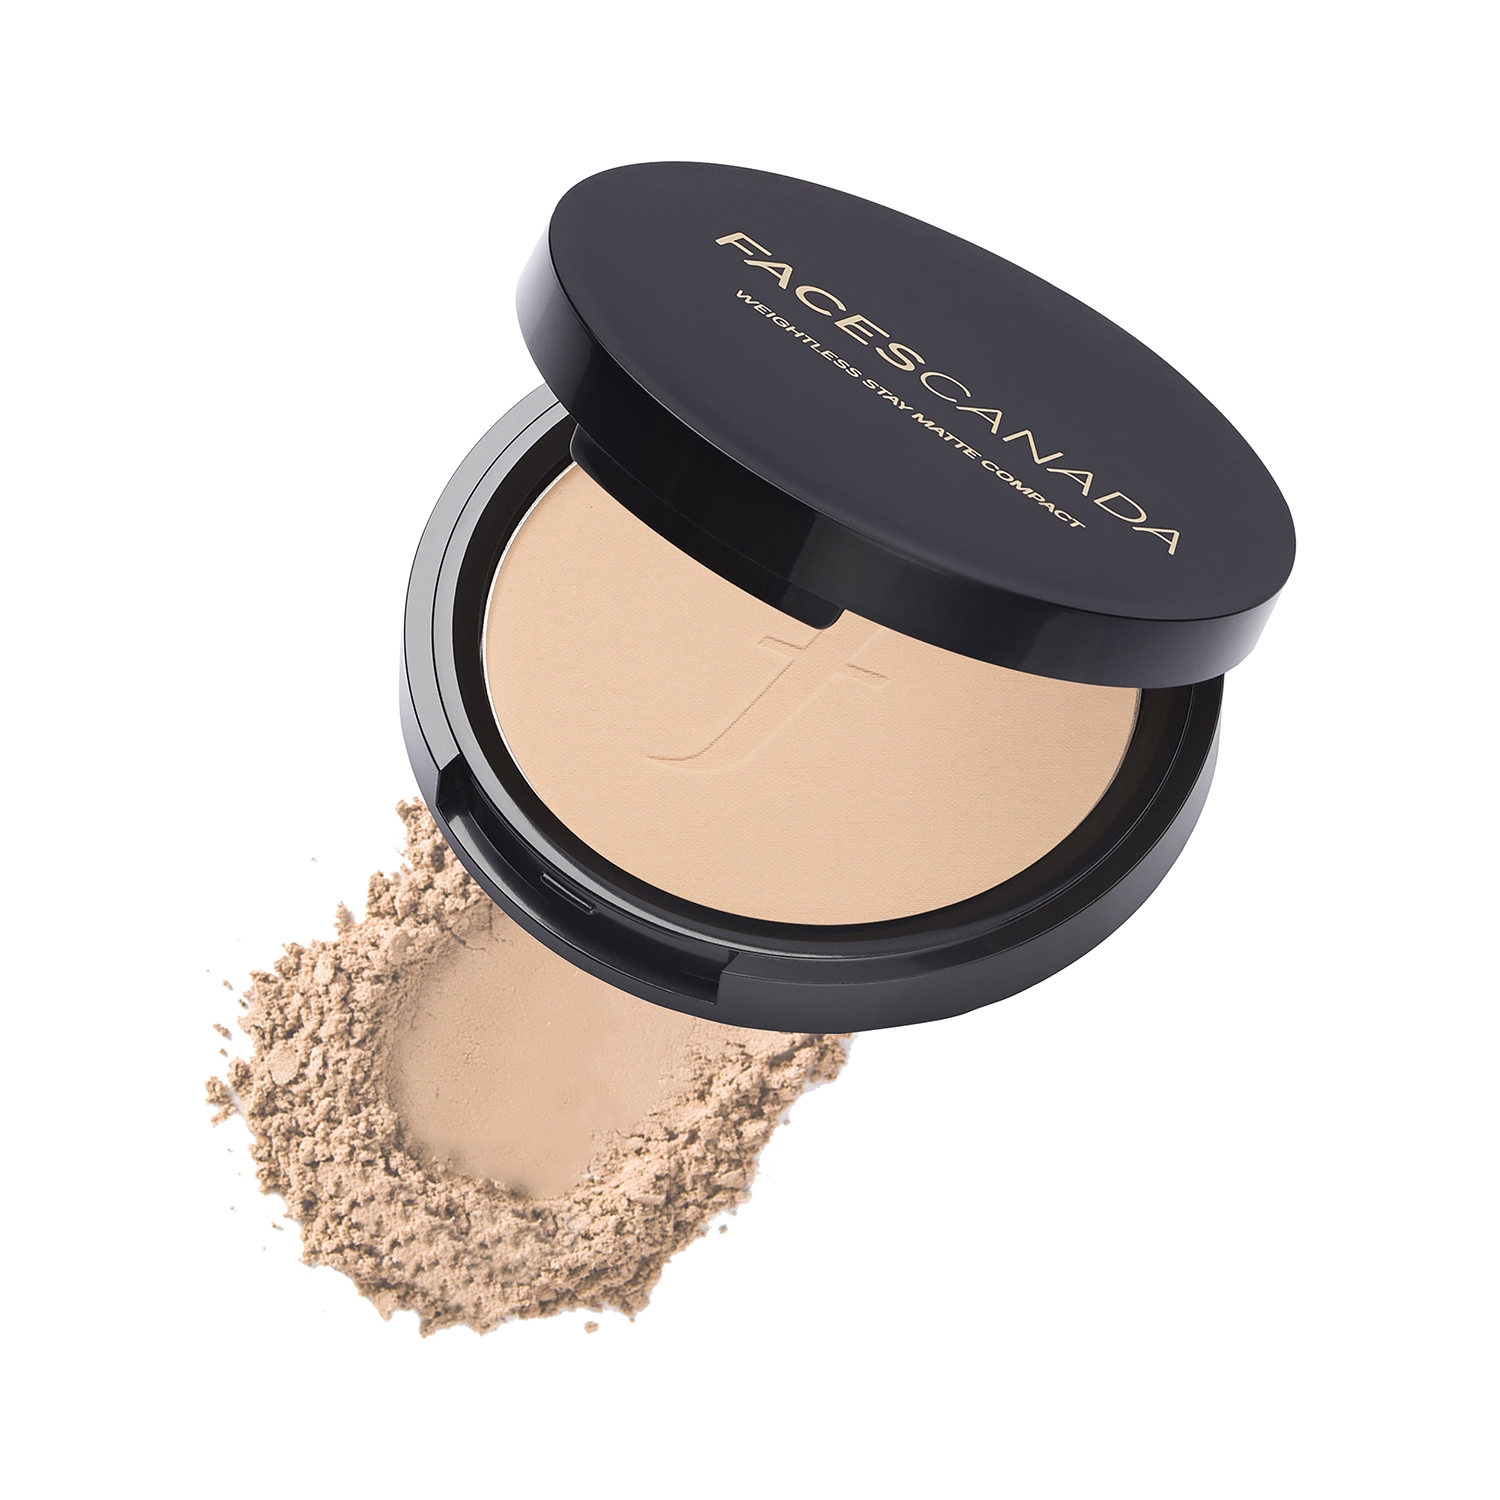 Faces Canada | Faces Canada Weightless Stay Matte Compact - 01 Ivory (9g)